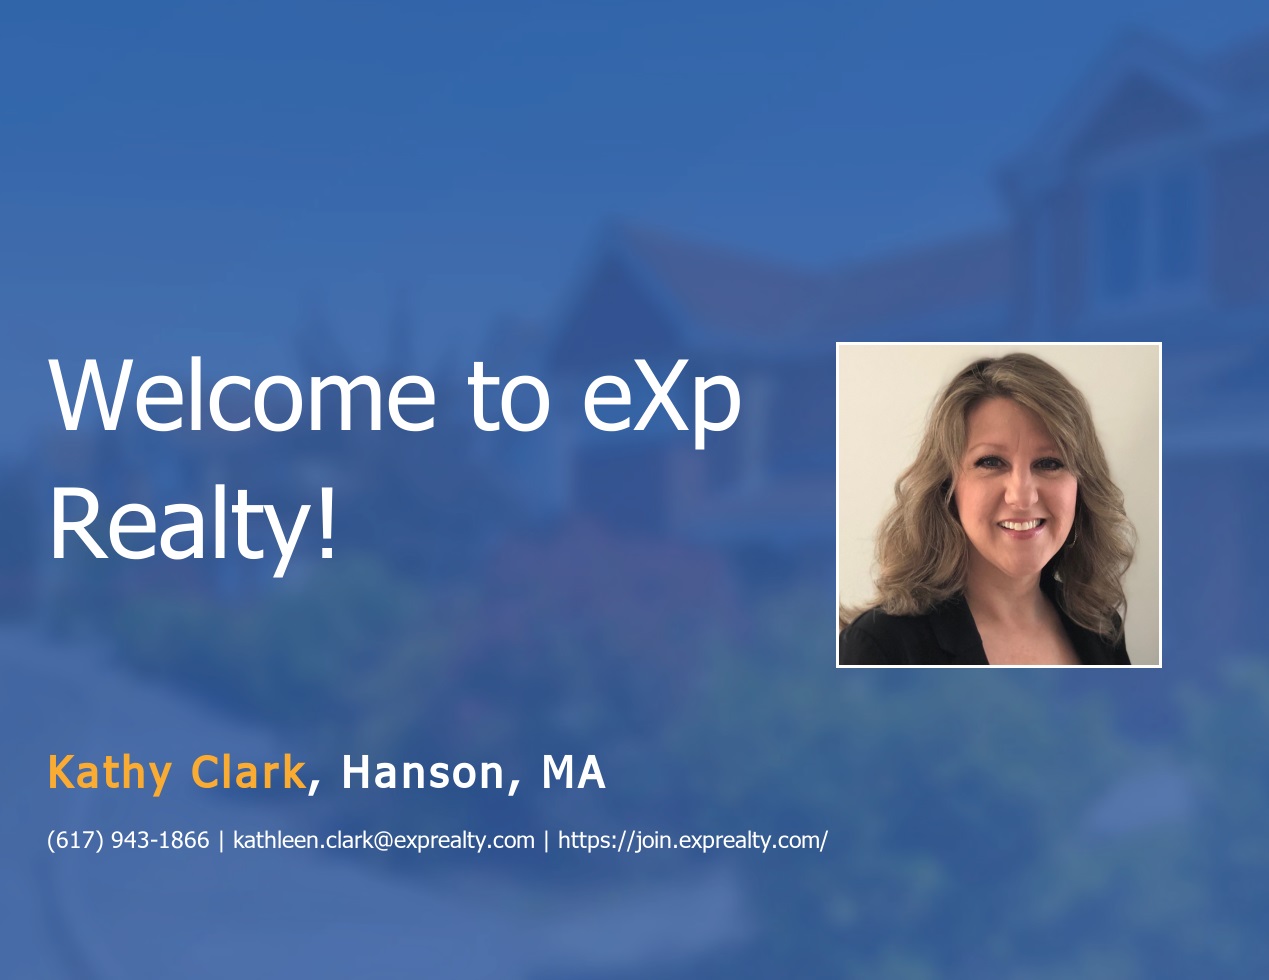 Welcome to EXP Realty Kathy Clark